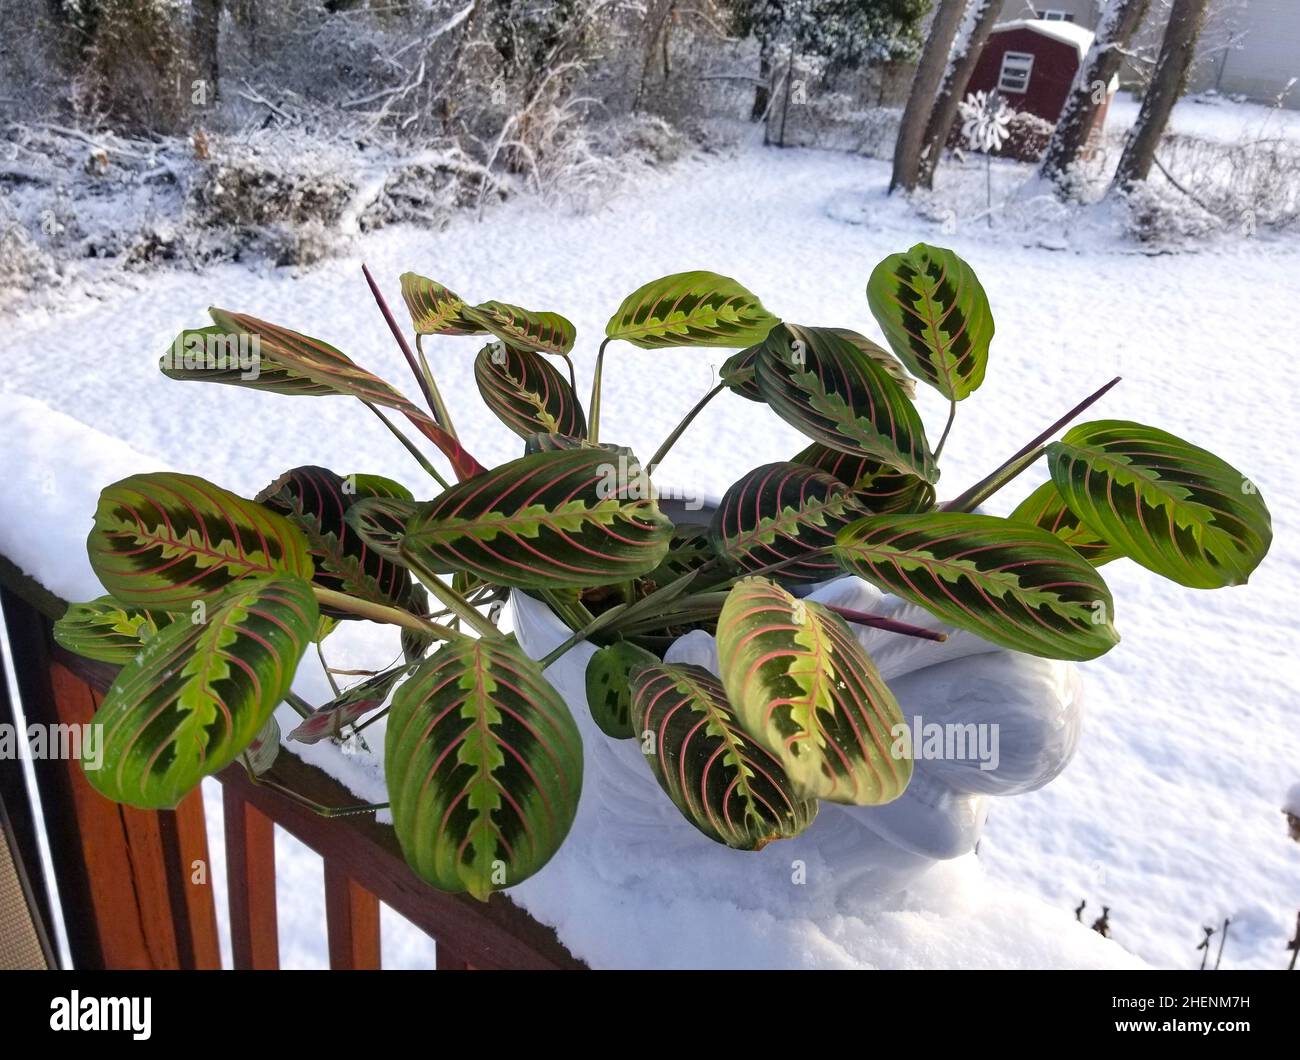 The Red-vein Prayer plant 'Erythroneura' on top of the white snow Stock Photo